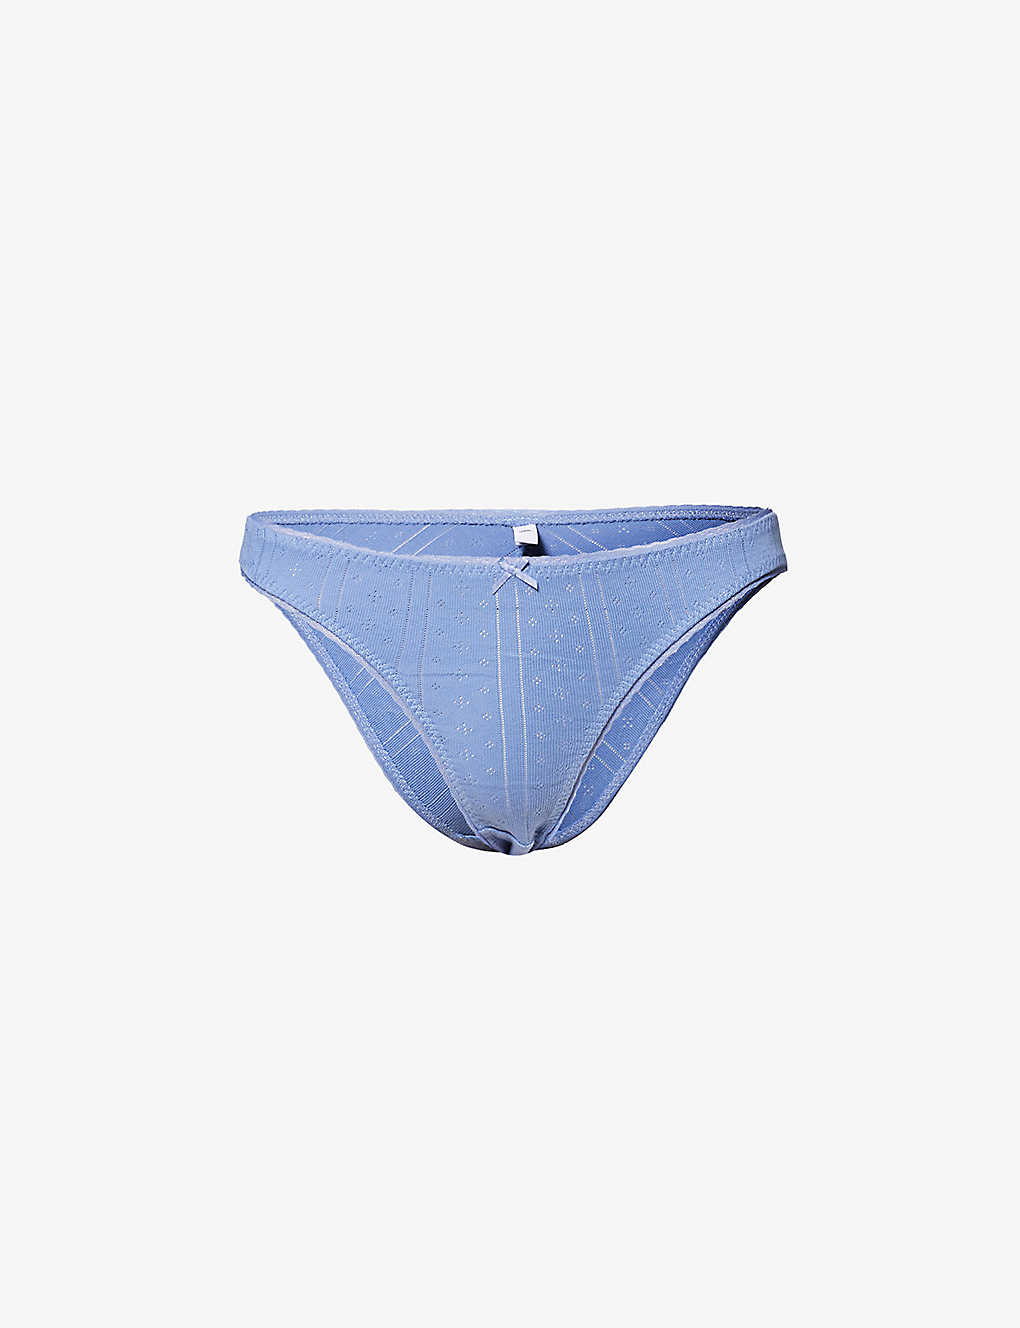 Cou Cou Intimates Womens French Blue Pointelle High-rise Organic-cotton Briefs